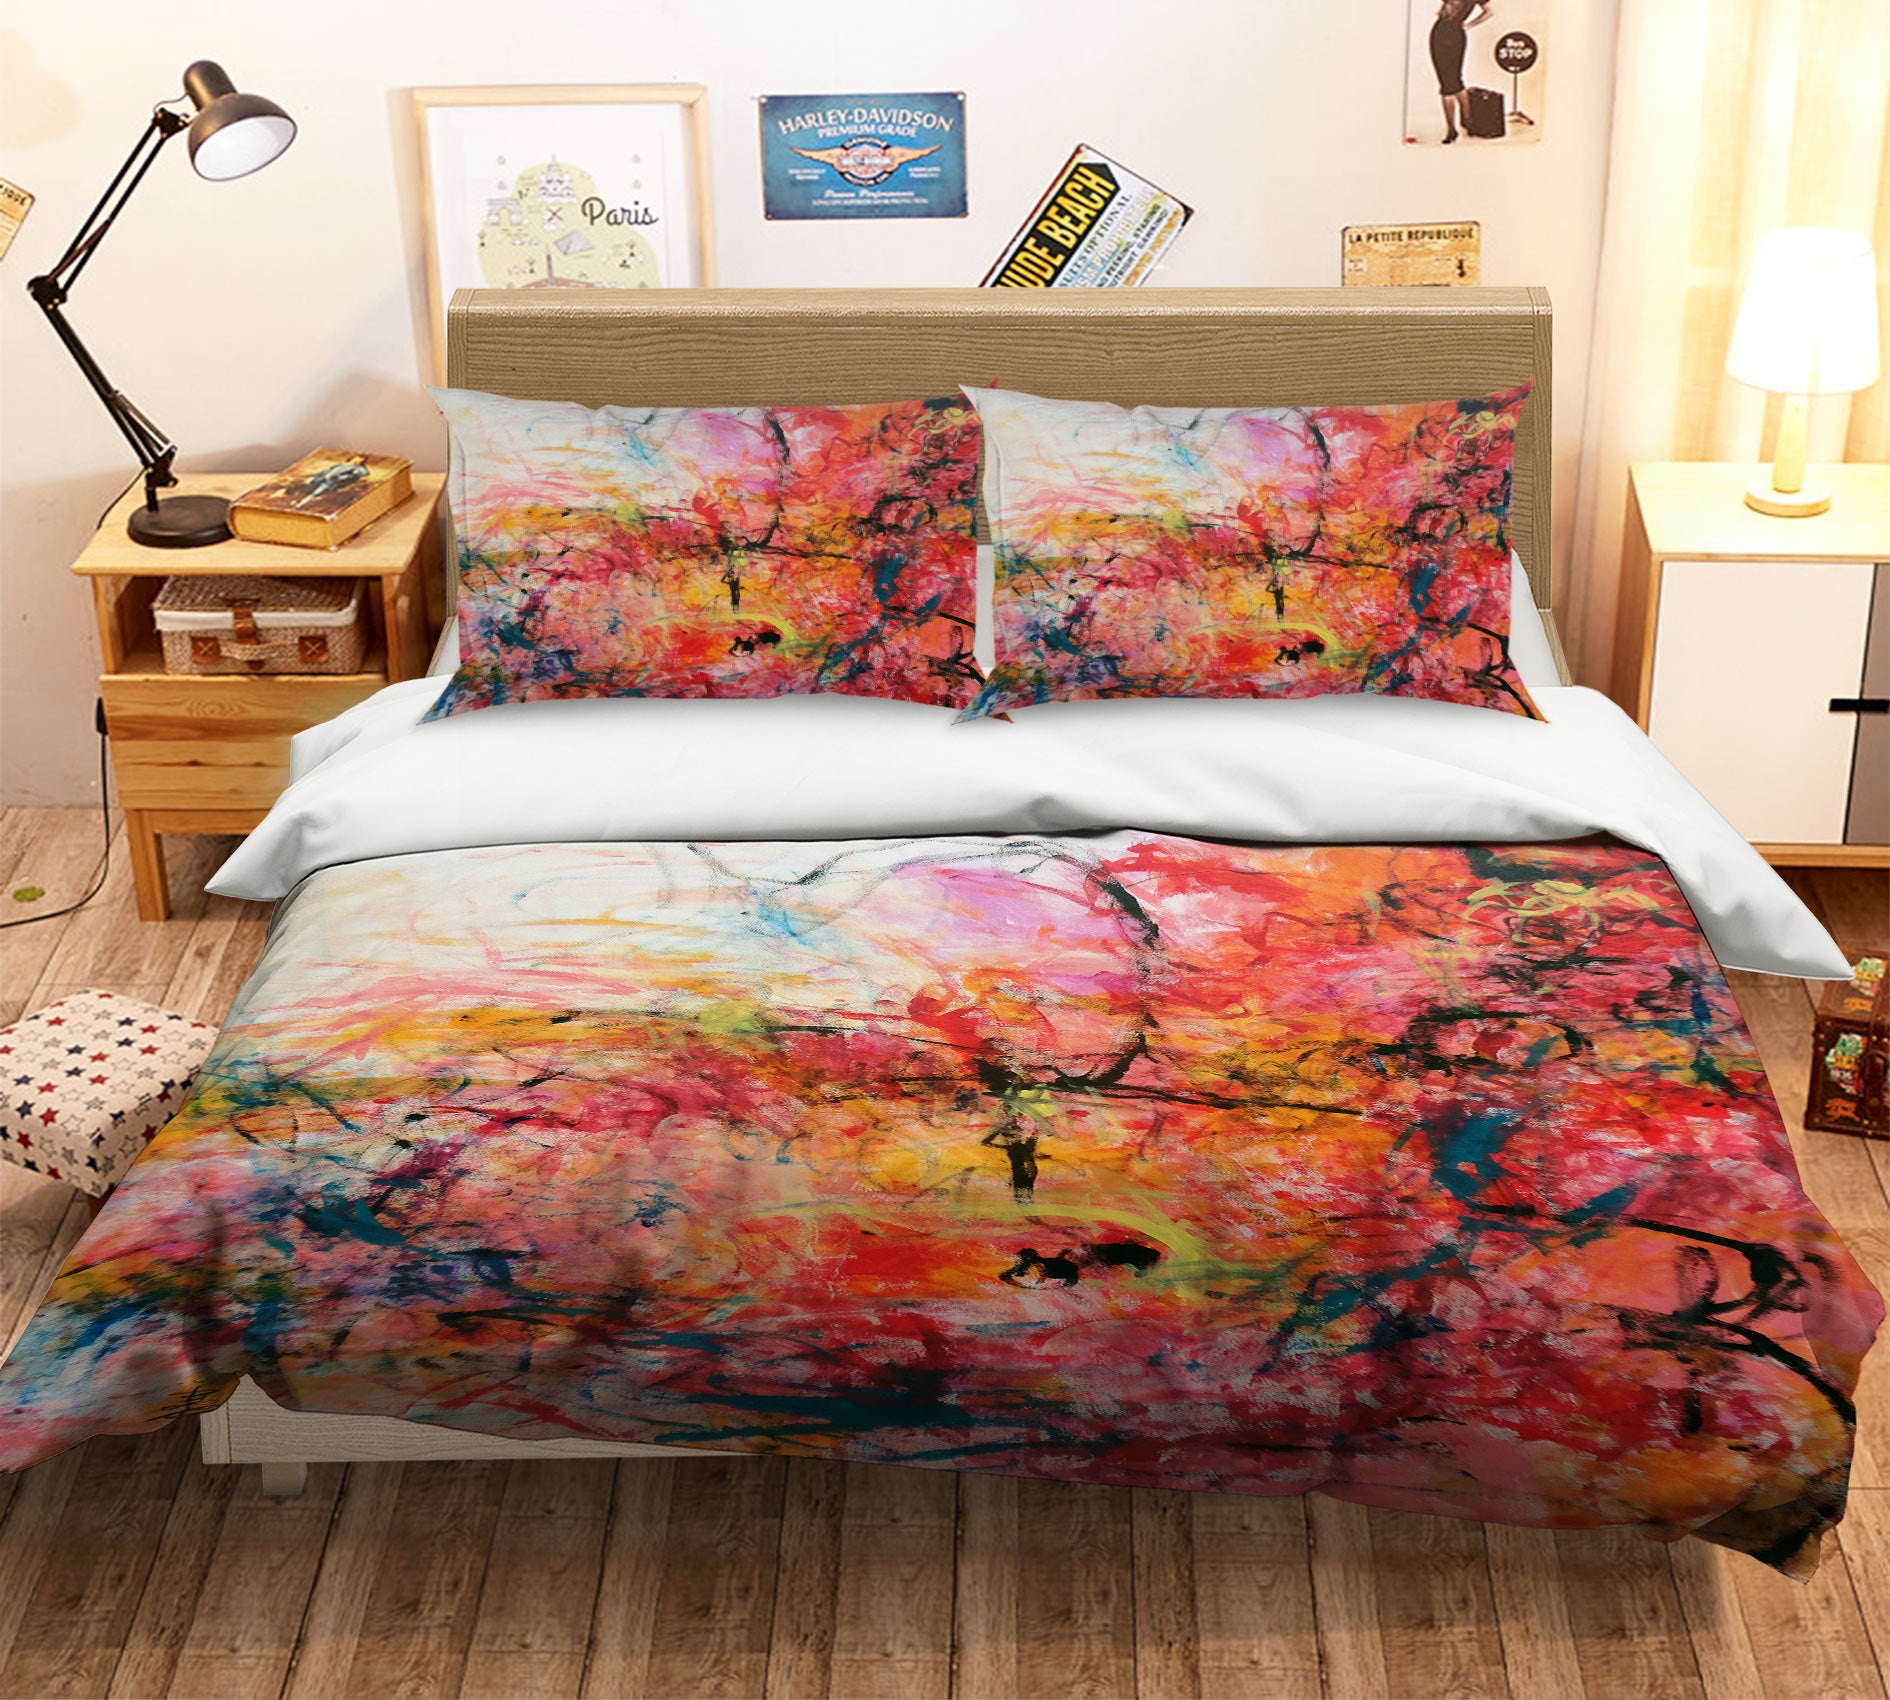 3D Painted Pigments 1140 Misako Chida Bedding Bed Pillowcases Quilt Cover Duvet Cover